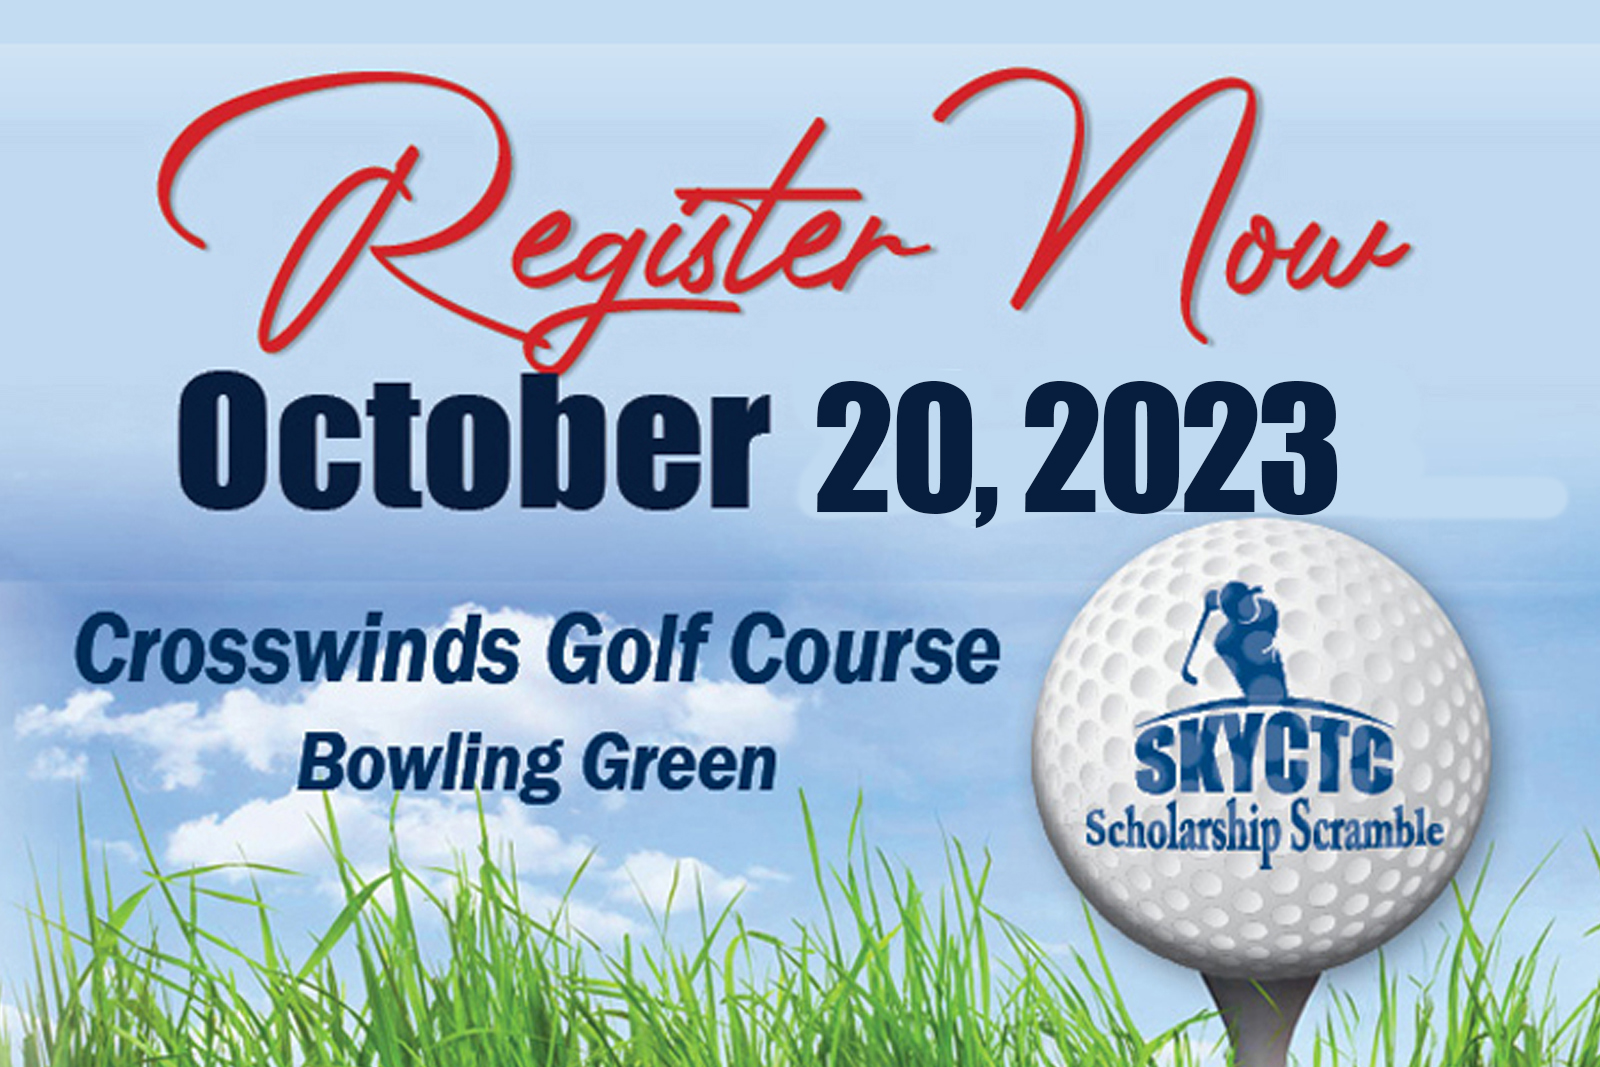 Register Now for SKYCTC Scholarship Golf Scramble at Crosswinds Golf Course in Bowling Green on October 21, 2022.